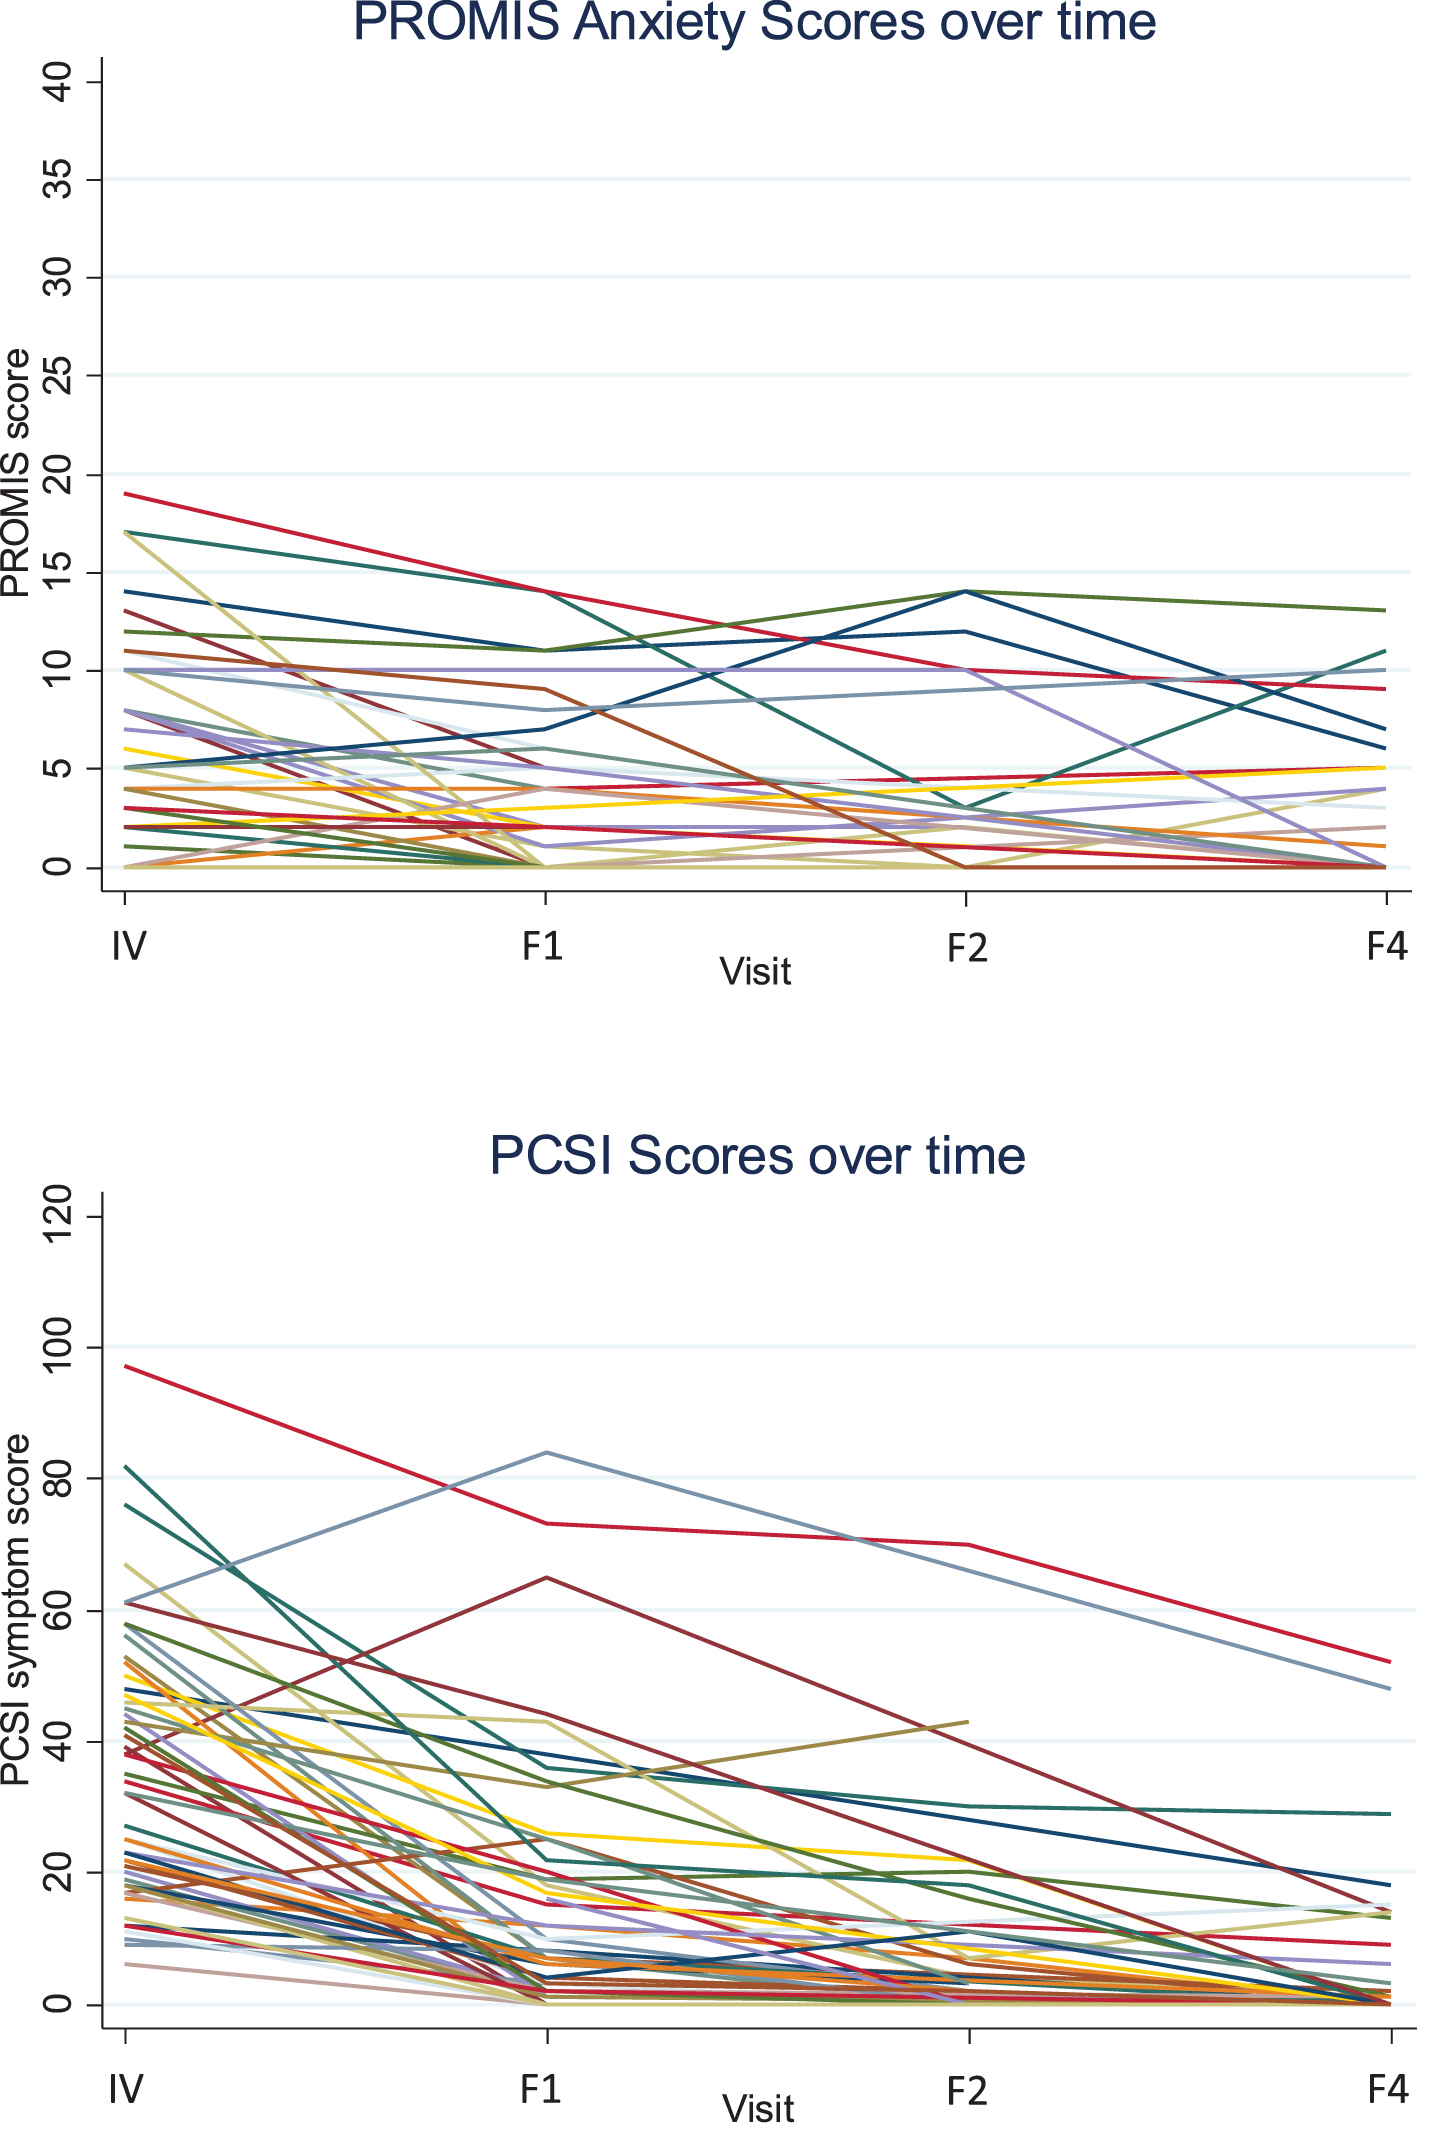 Individual PROMIS Anxiety and PCSI scores over time. Note: IV = initial visit, F1 = follow-up visit #1, F2 = follow-up visit #2, F4 = week-4 follow-up visit.